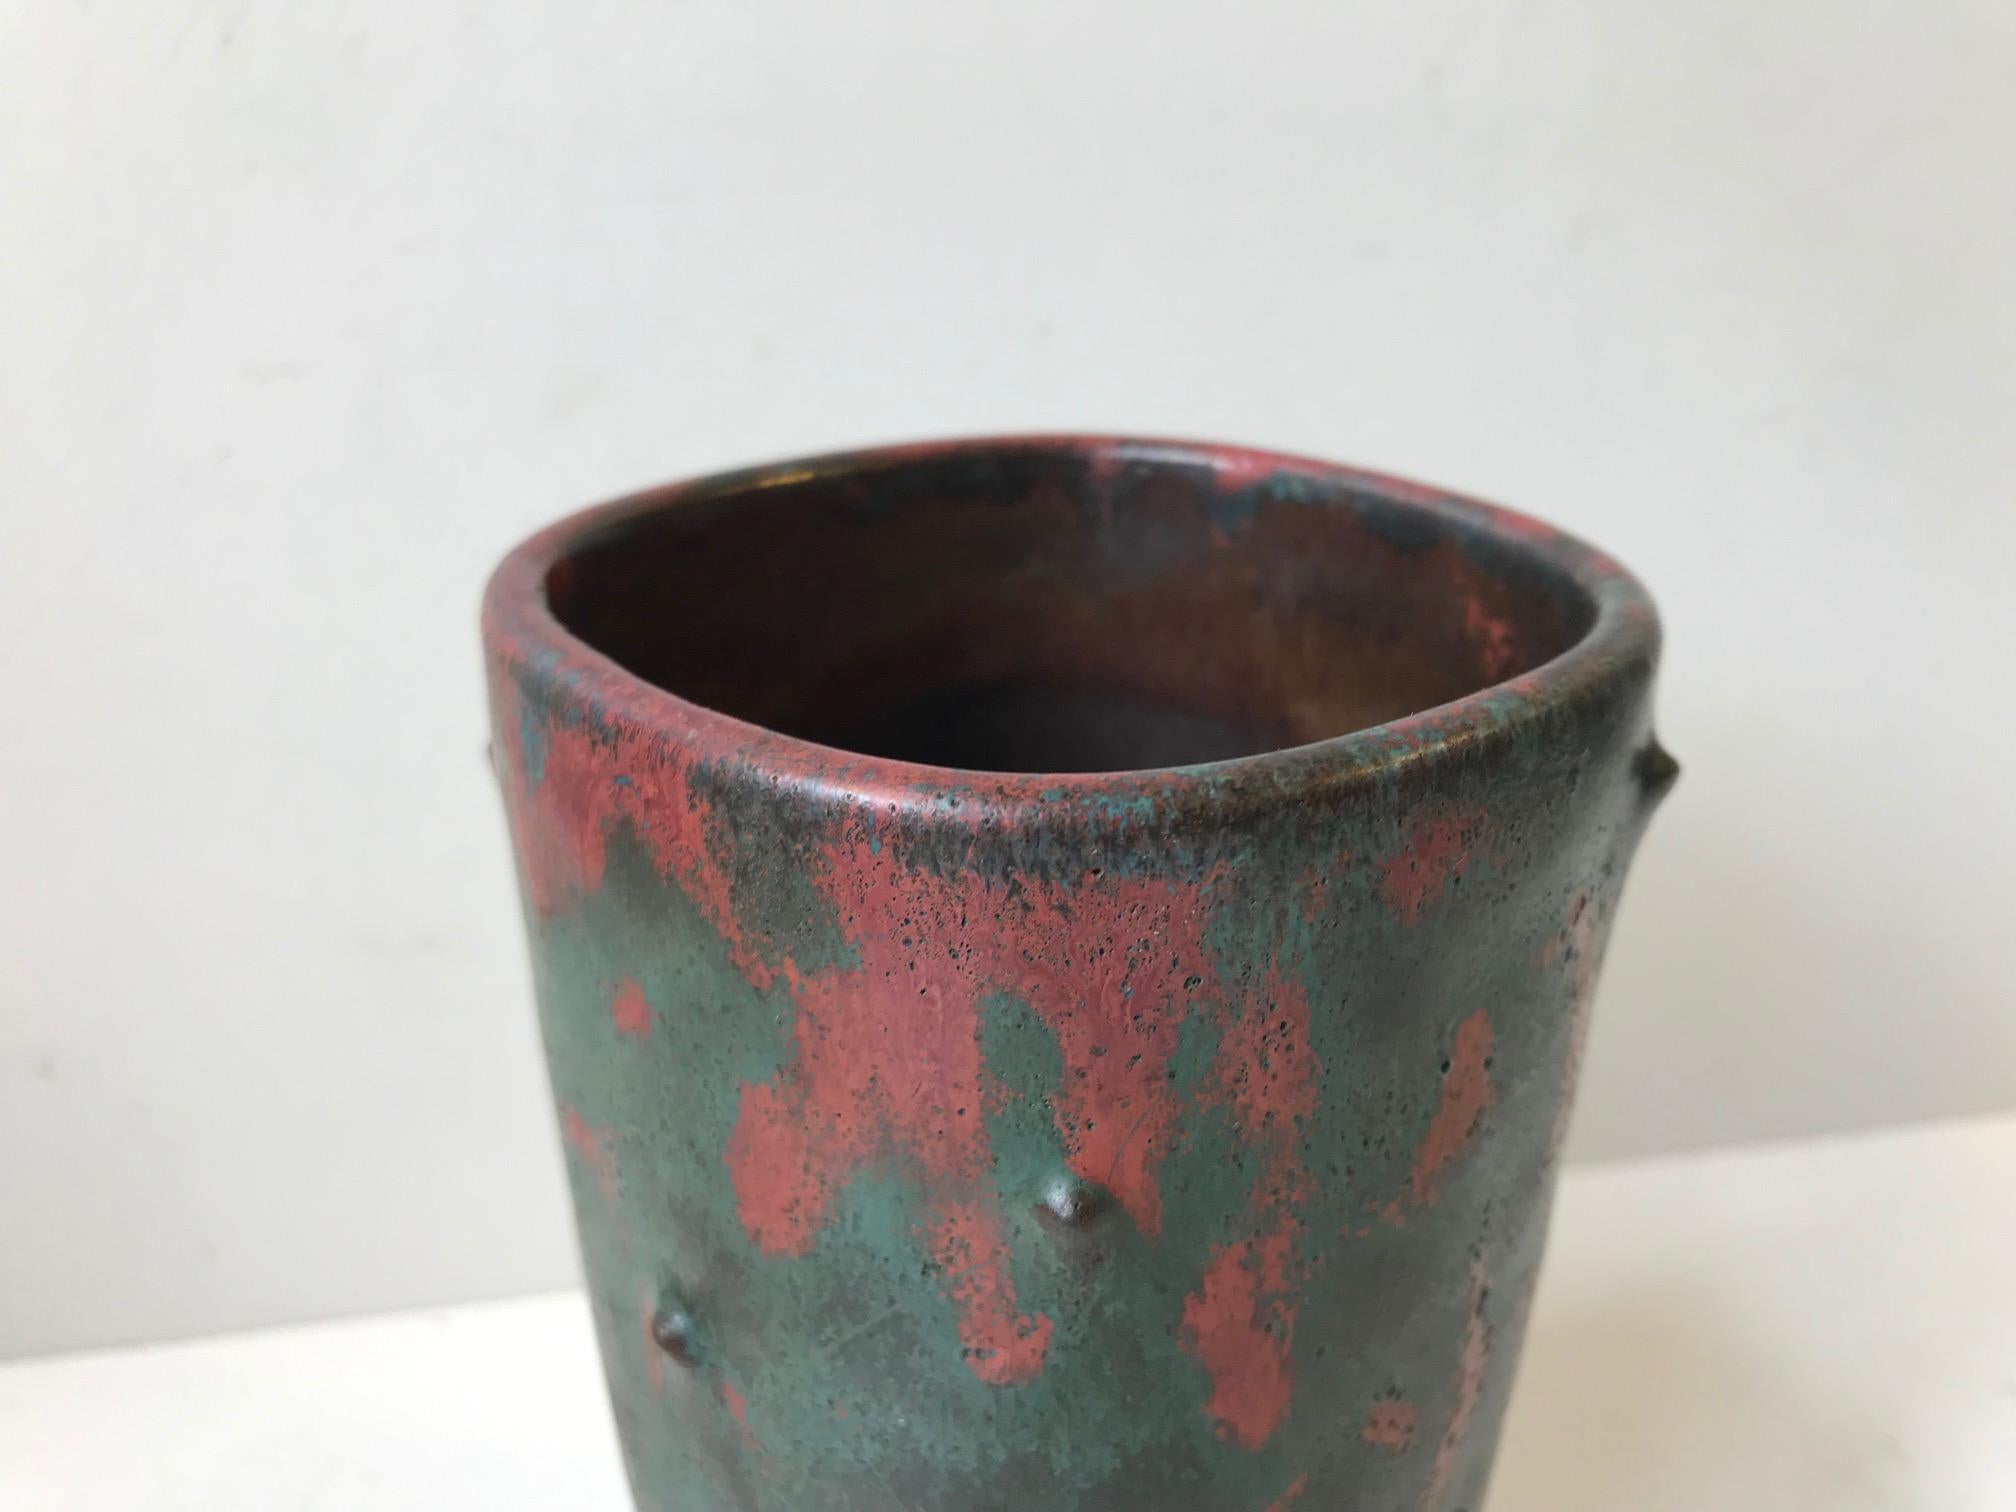 Danish Art Deco Pottery Vase with Camou-Glaze by Niels Peter Nielsen for Dagnaes, 1940s For Sale